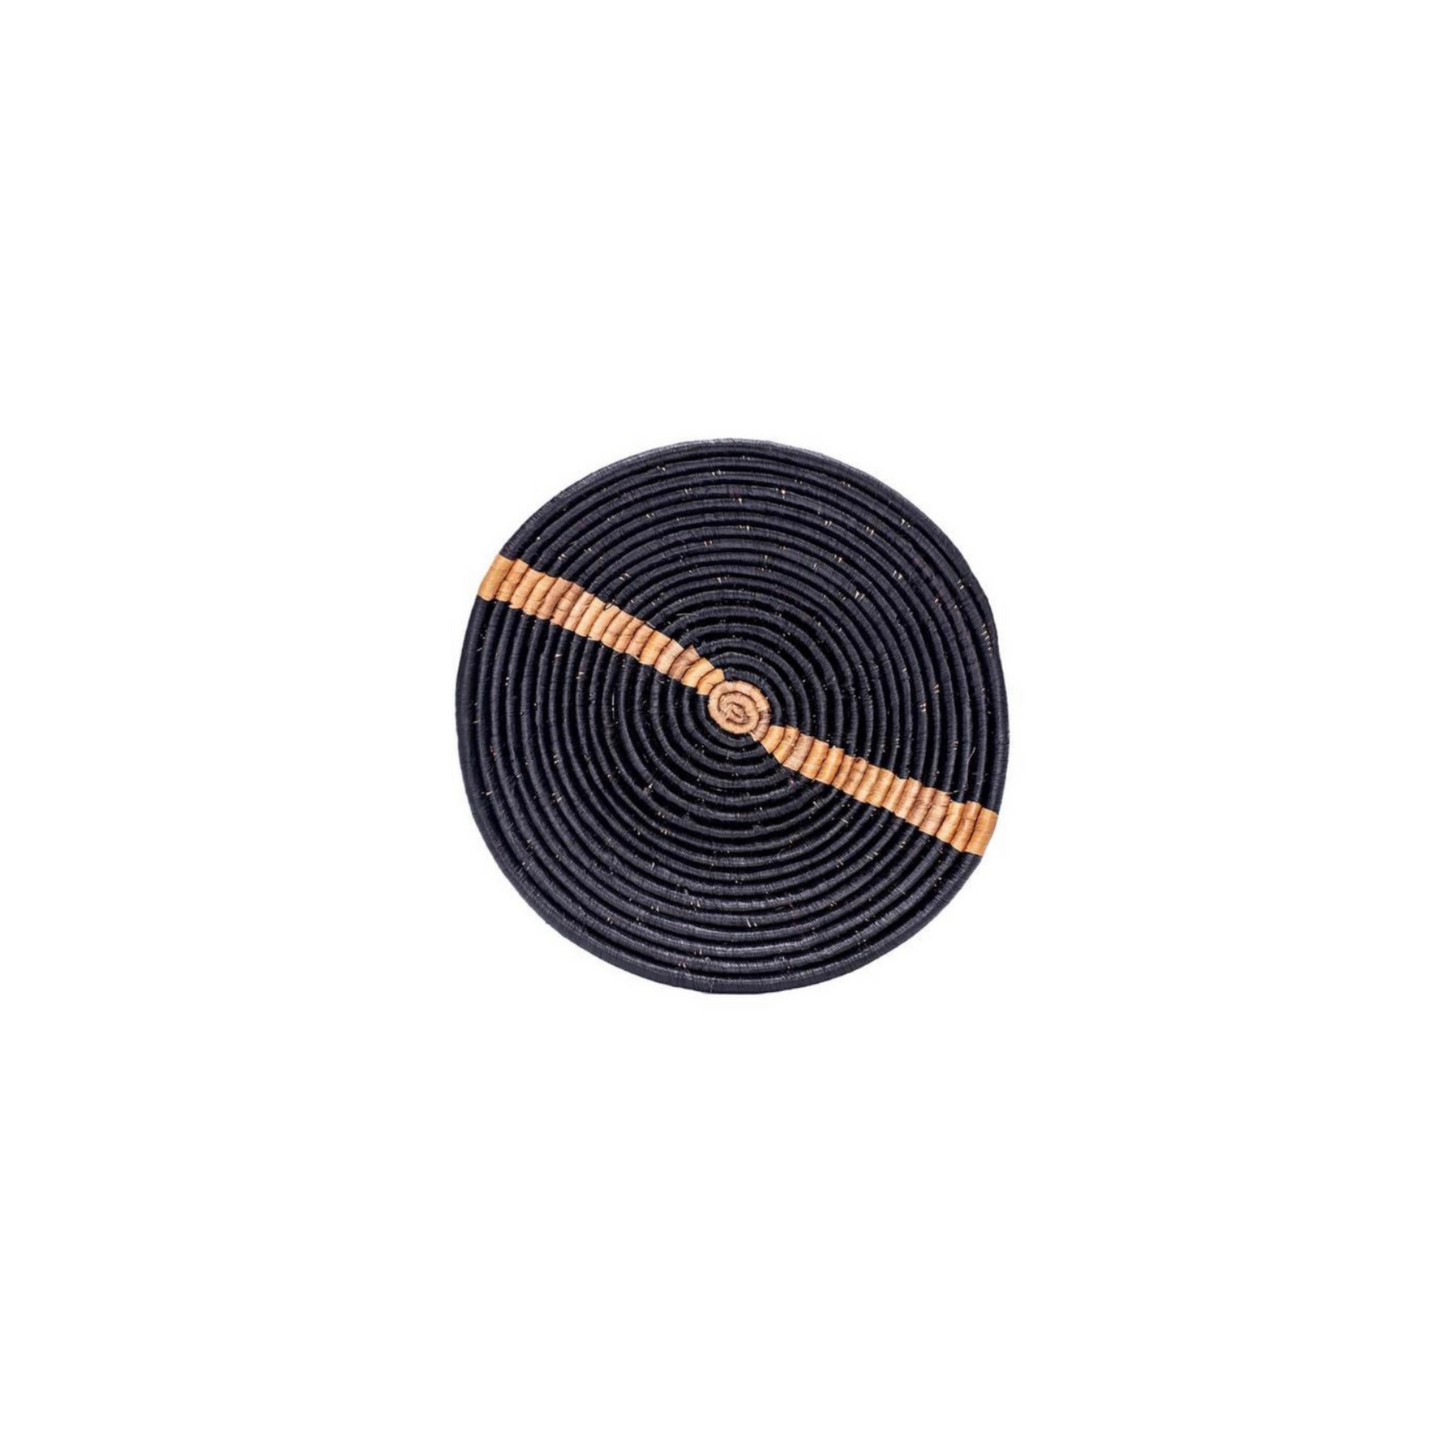 Black kazi woven bowl with natural streak in center of bowl 